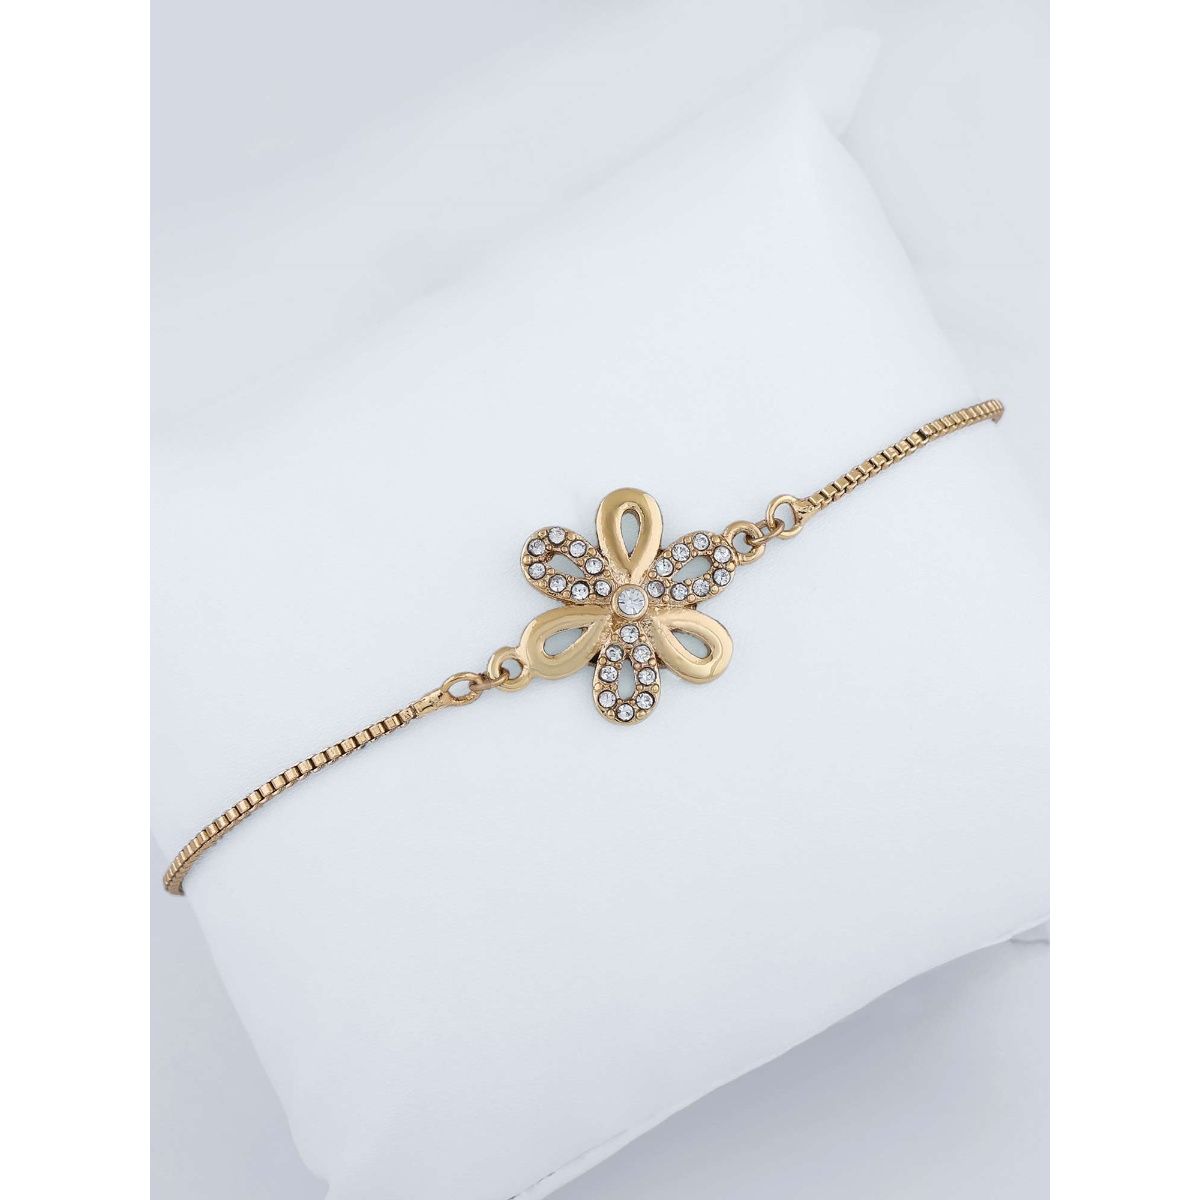 Charming Valentine's Day Gift Flower Jewelry Real Gold Women Girl Chain  Bracelet & Bangle Wedding Bridal Jewelry Gifts | Wish